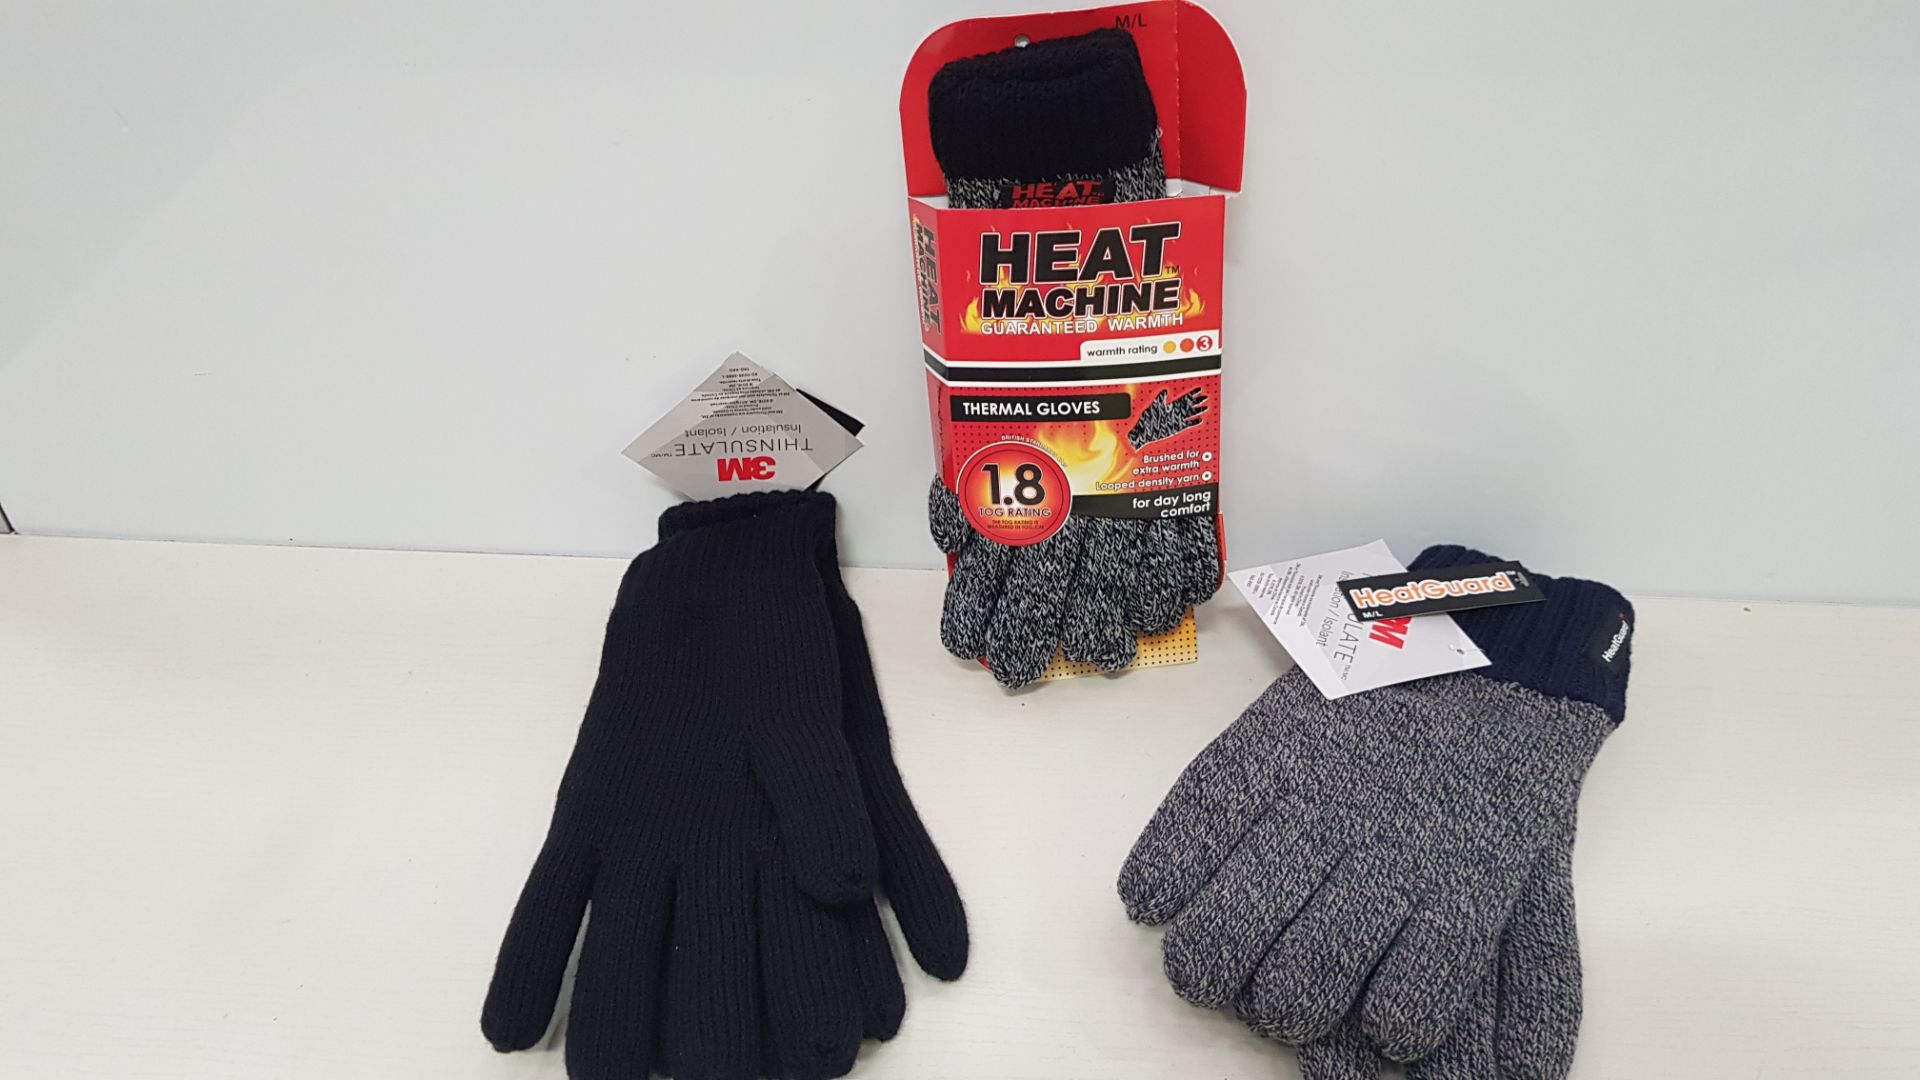 40 PIECE MIXED CLOTHING LOT CONTAINING BEECHFIELD GLOVES AND HEAT MACHINE THERMAL GLOVES ETC